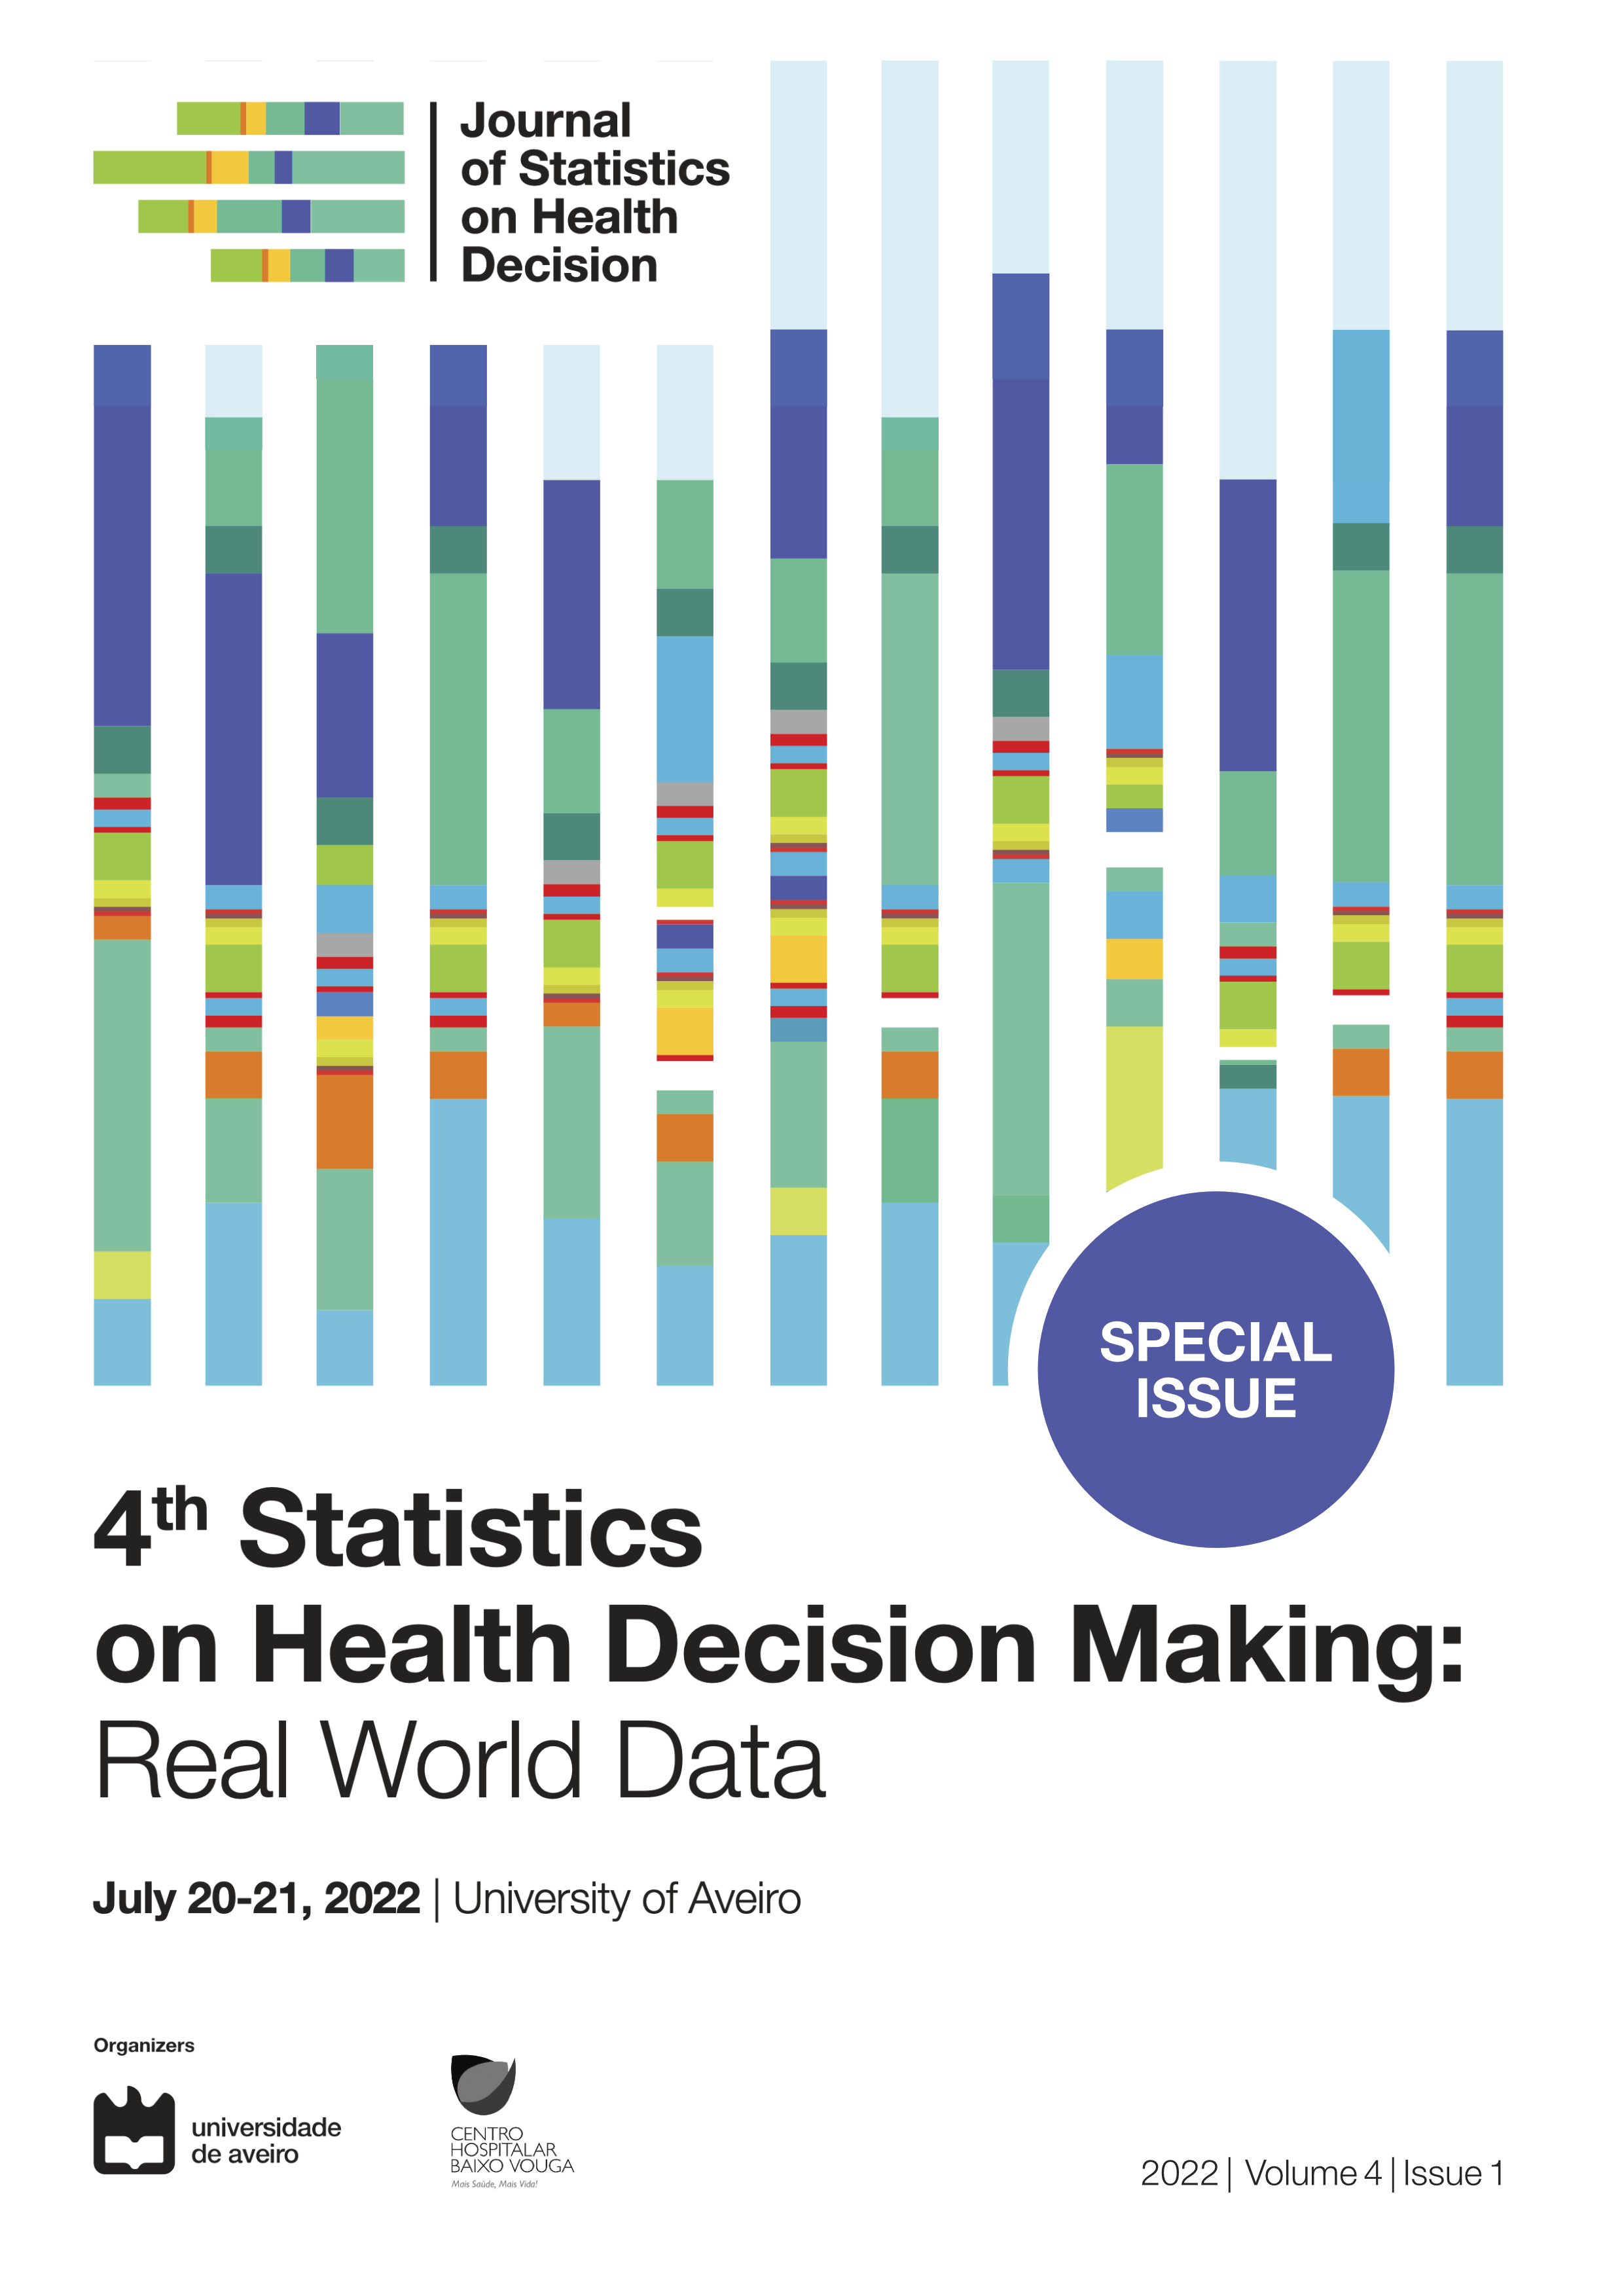 Journal of Statistics in Health Decision, 2022 Special Issue, 4th Statistics on Health Decision Making: Real Word Data